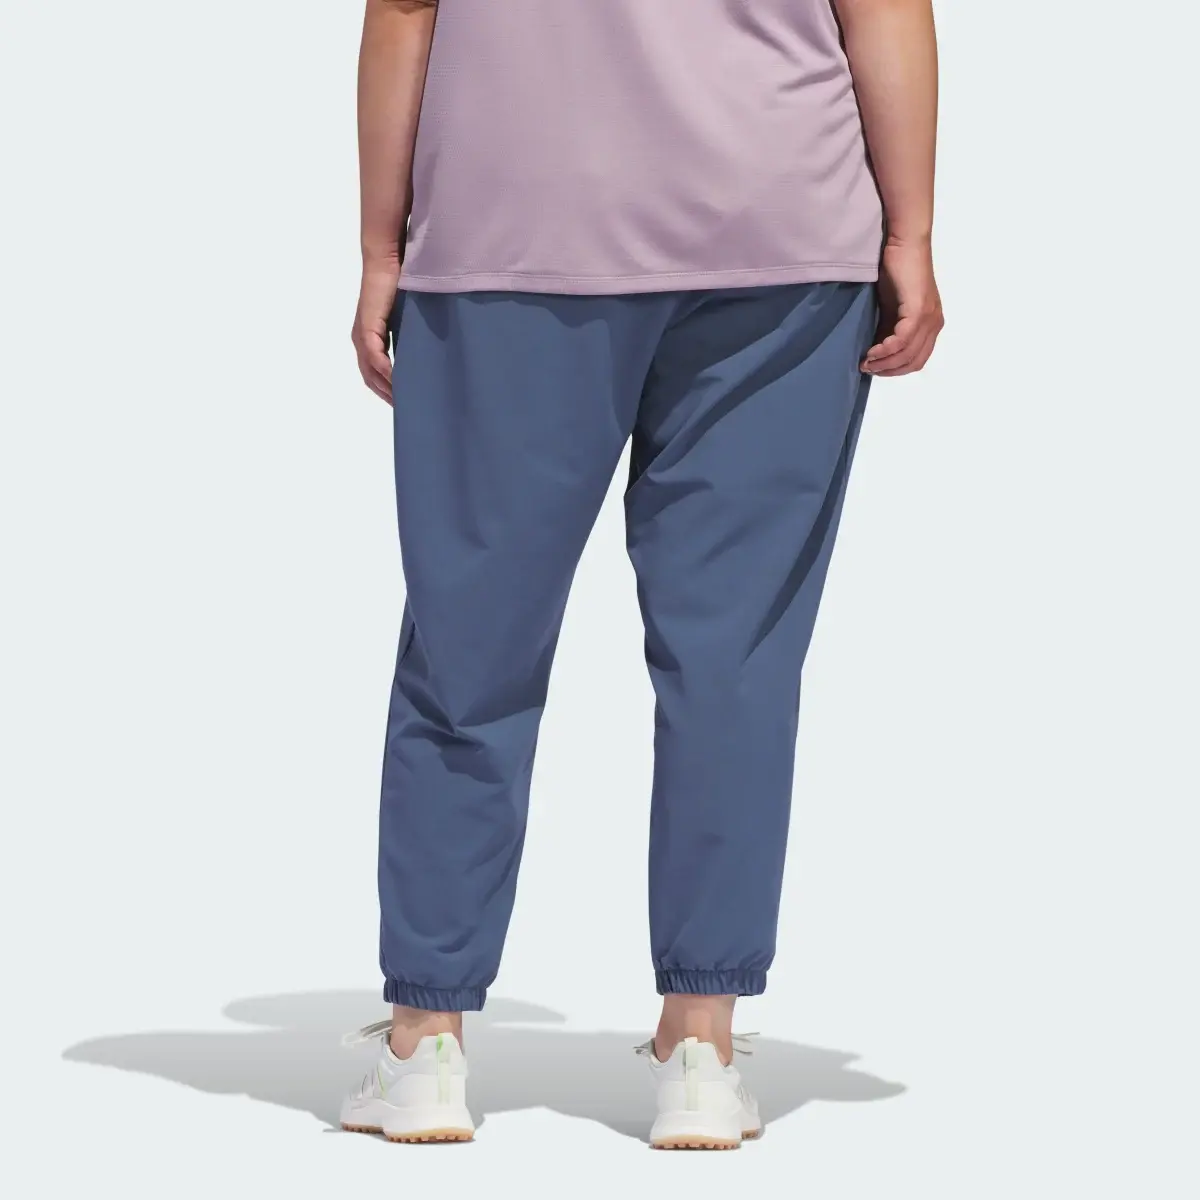 Adidas Women's Ultimate365 Joggers (Plus Size). 2